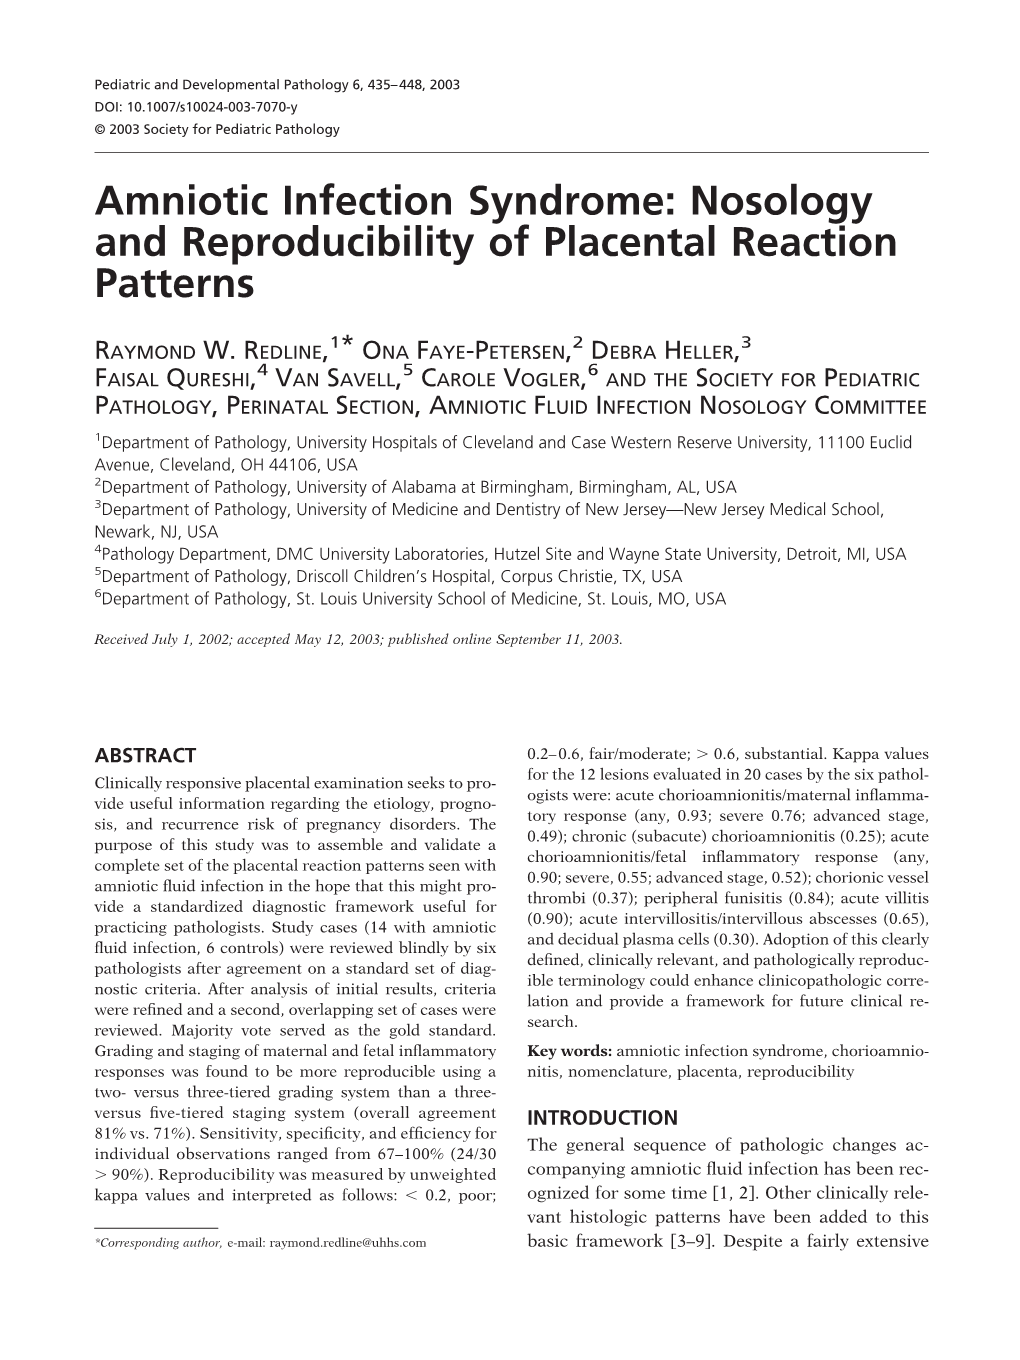 Amniotic Infection Syndrome: Nosology and Reproducibility of Placental Reaction Patterns